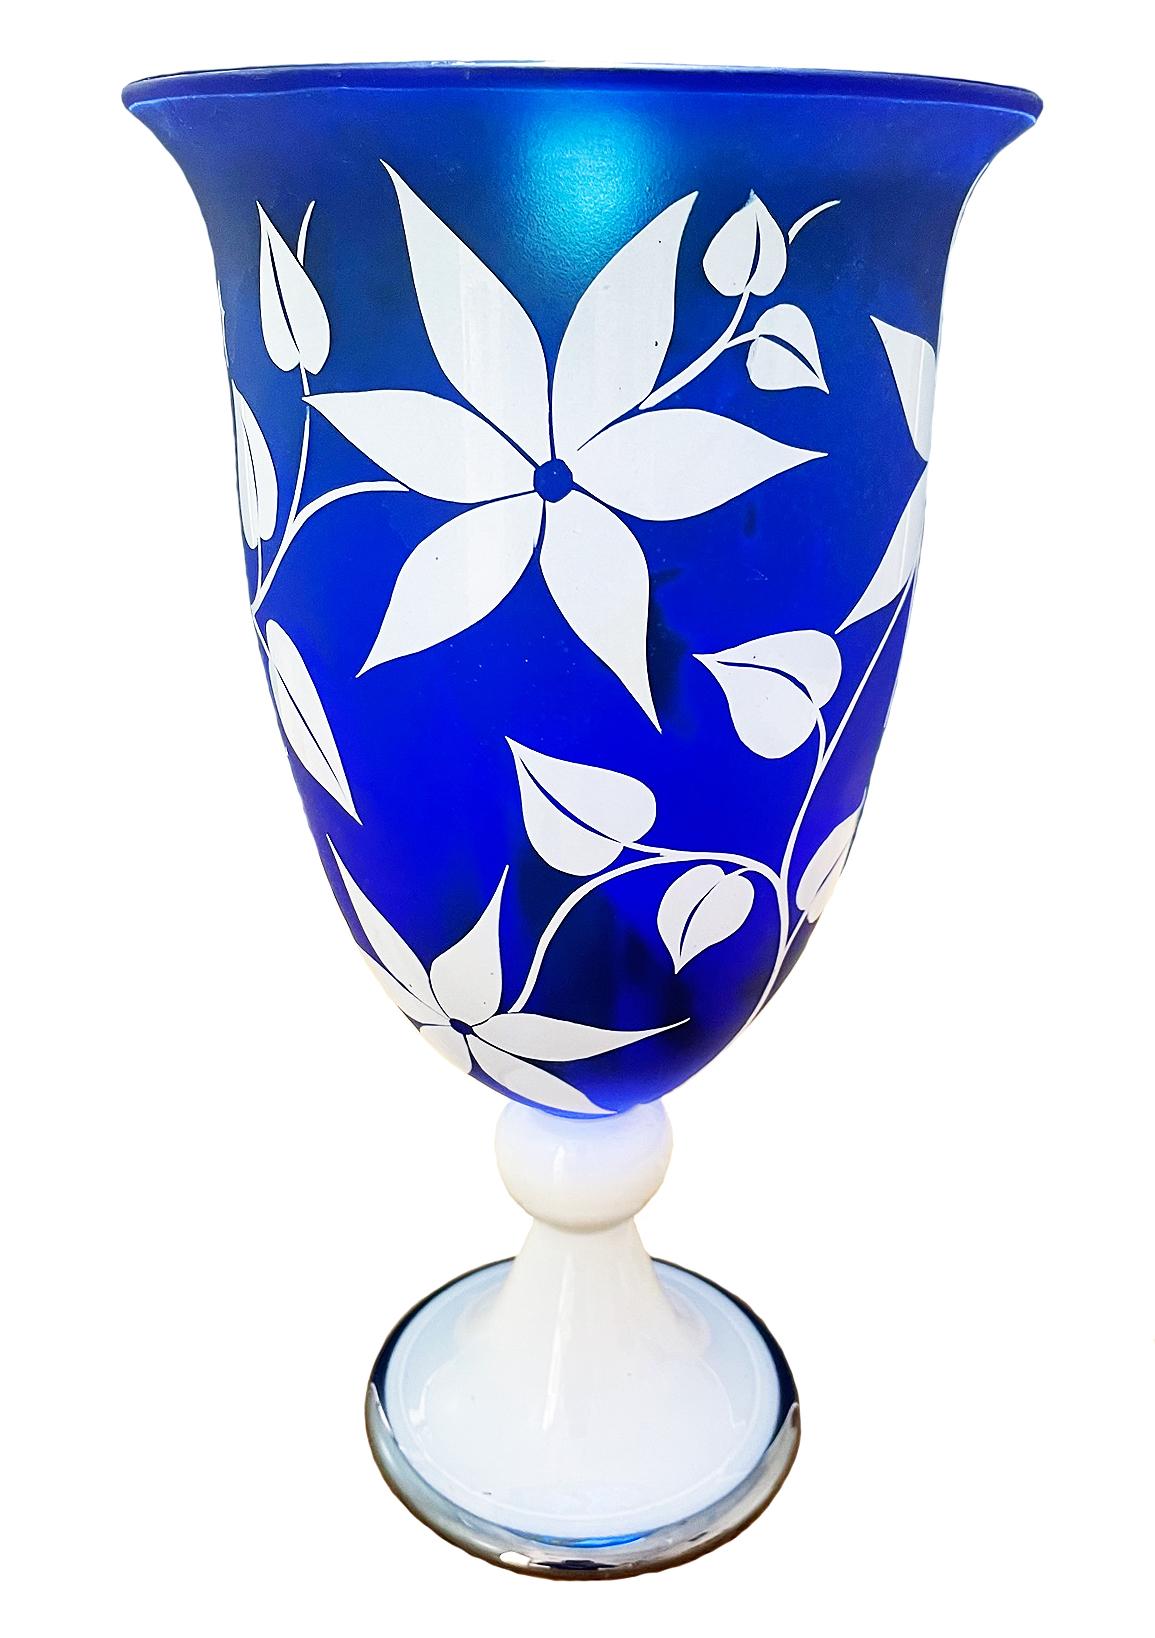 This cameo etched vessel by Gary Genetti is overlay blown glass. It features a cobalt blue background to enhance the graphic white overlay. The original artwork is drawn on the piece, hand cut then pressure etched through layers of color to create